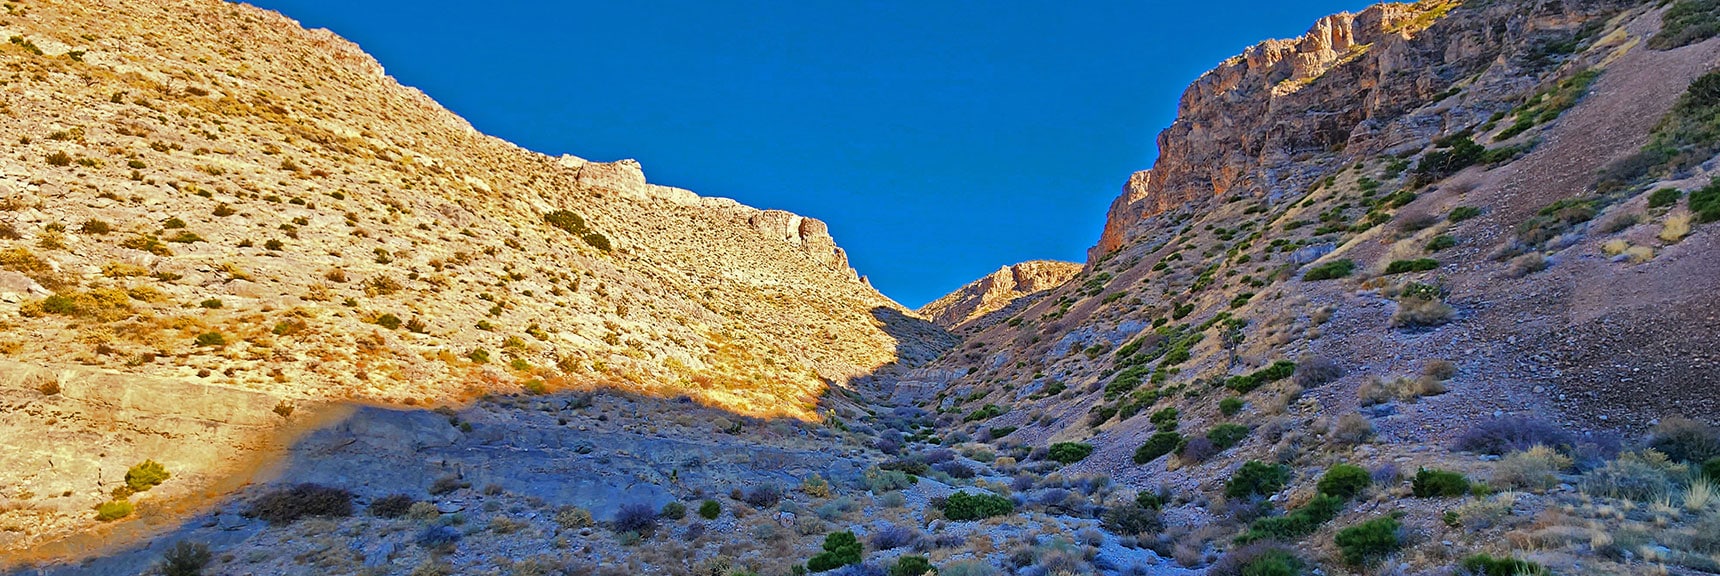 Here is the Chute. Gradual, Fairly Open Gully to Landmark Bluff Summit | Landmark Bluff Summit | Lovell Canyon, Nevada